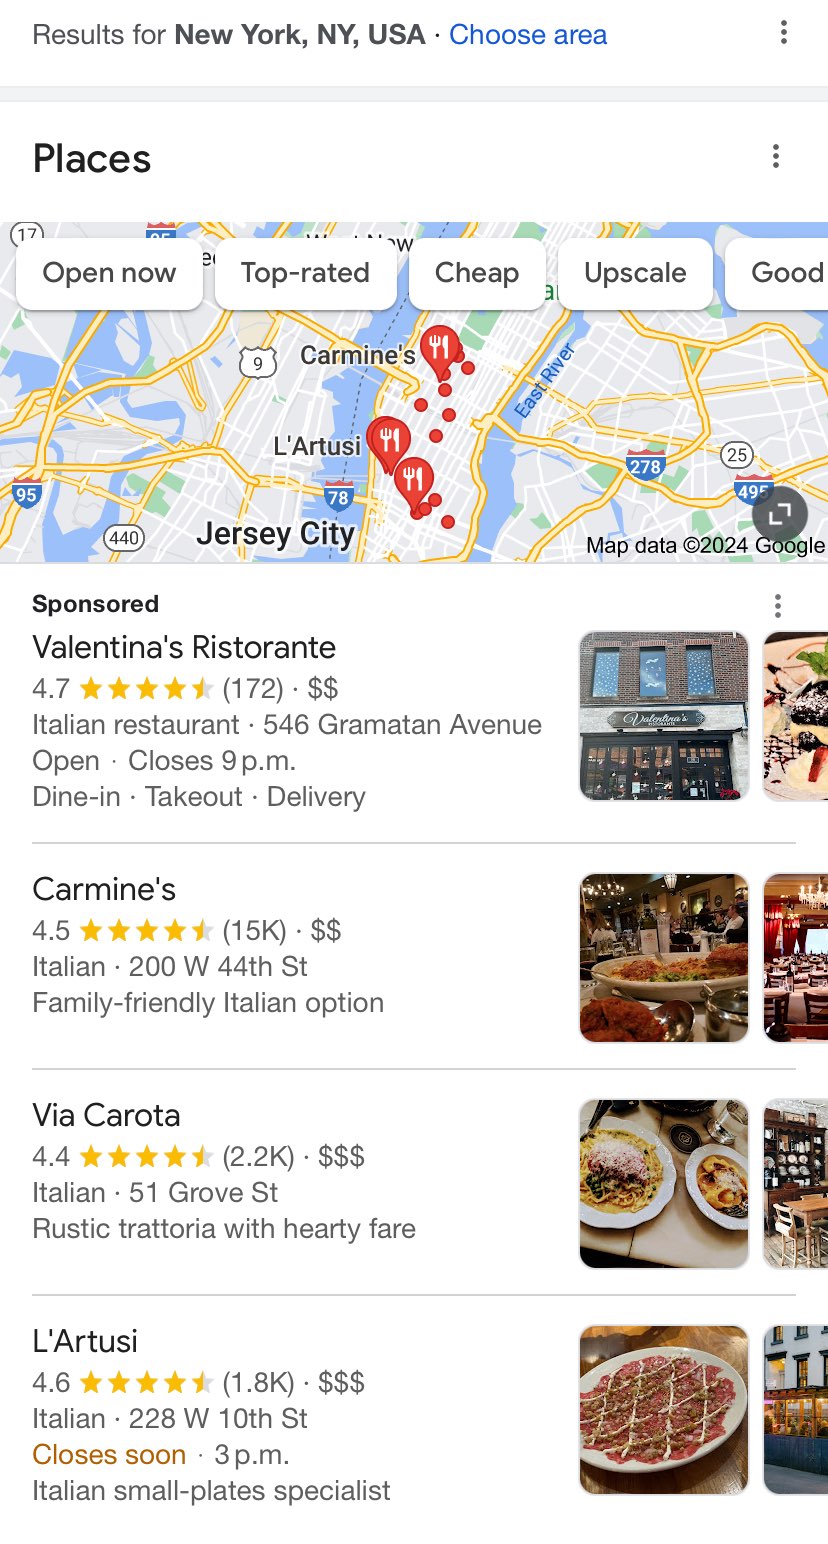 Google's local results for “Italian food” in New York